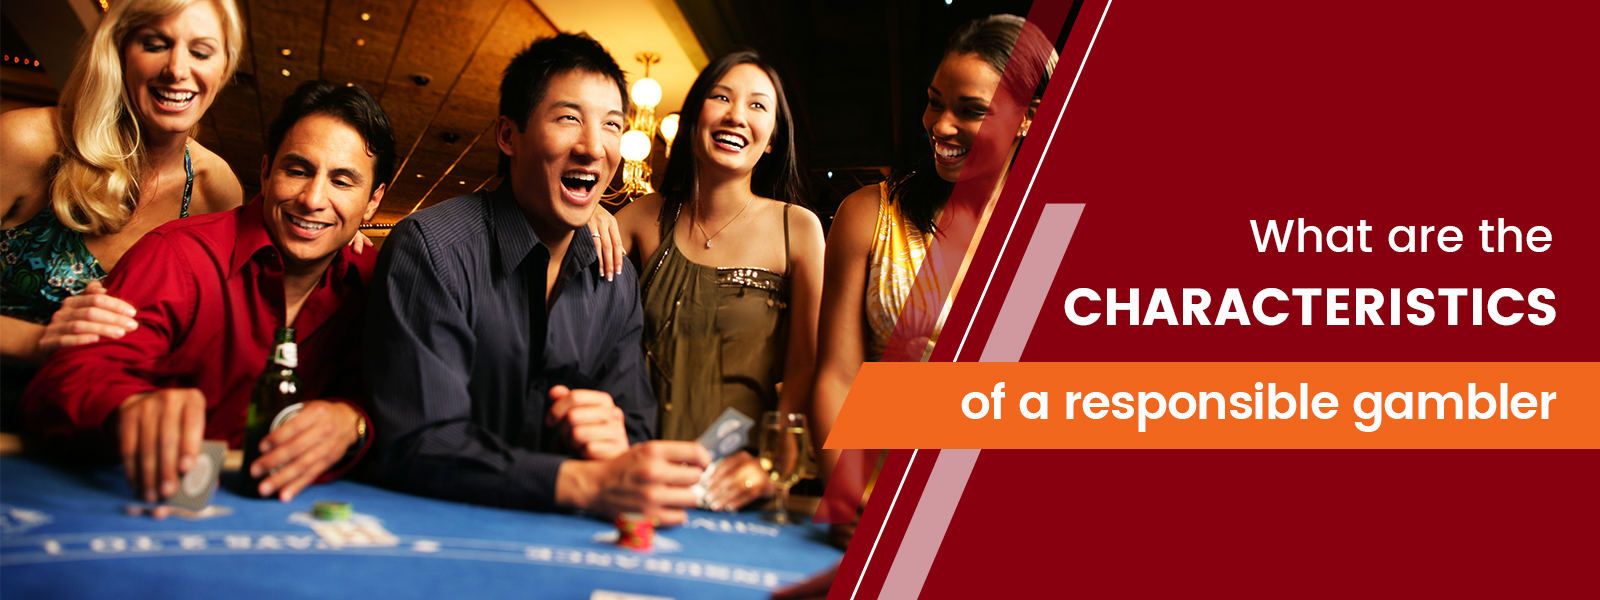 What Are The Characteristics Of A Responsible Gambler?